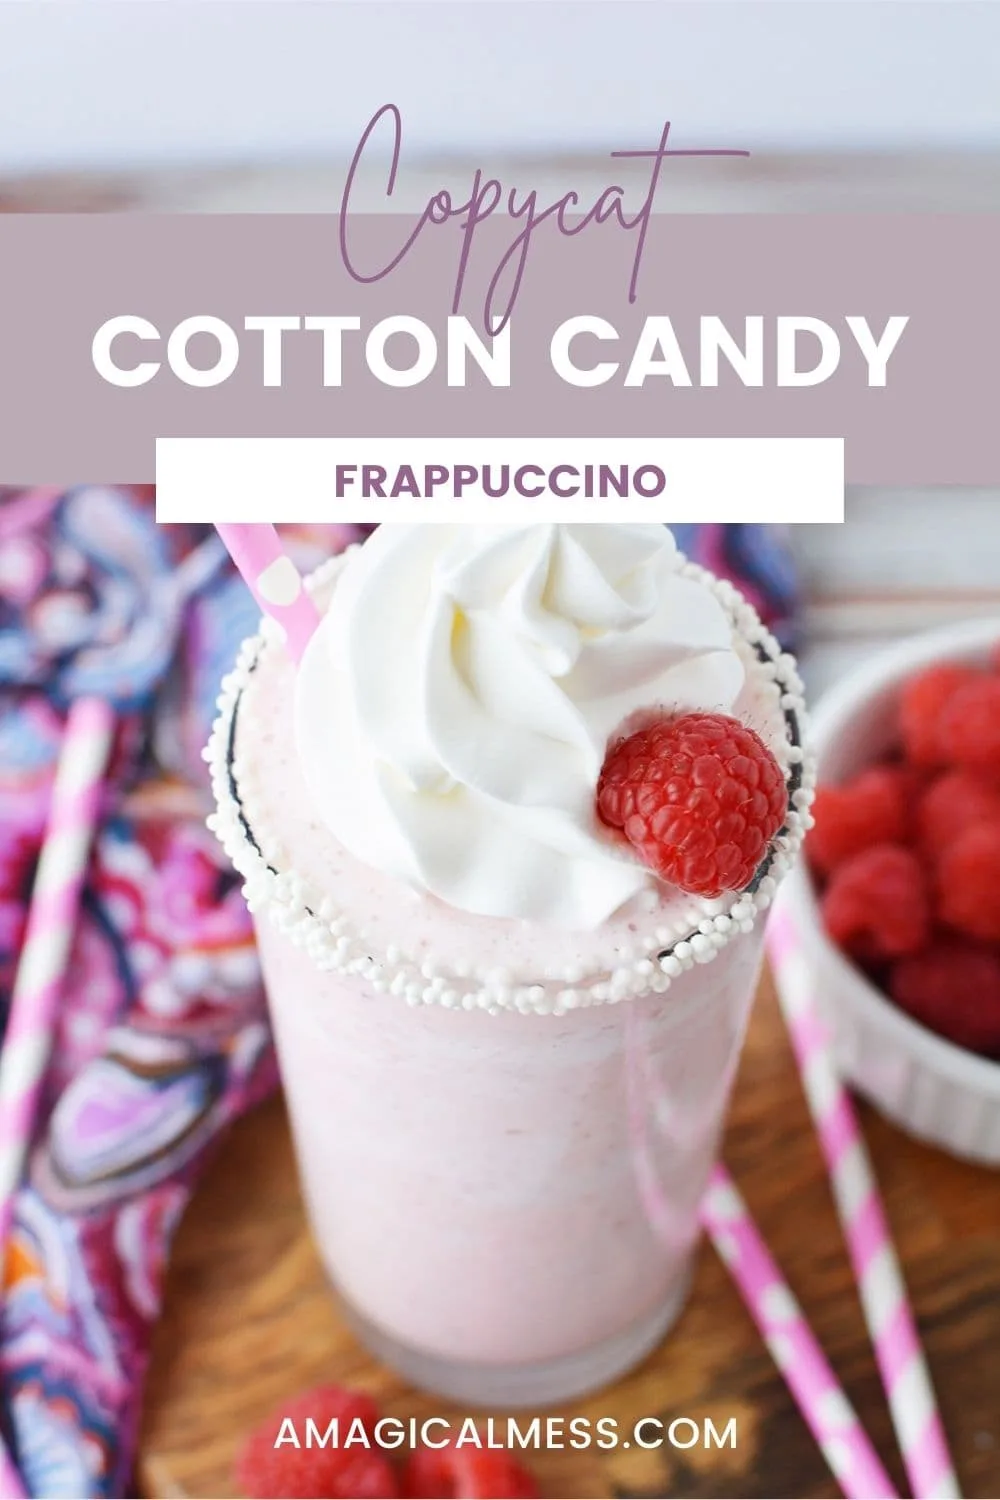 Cotton candy frapp with whipped cream and raspberries on a table.